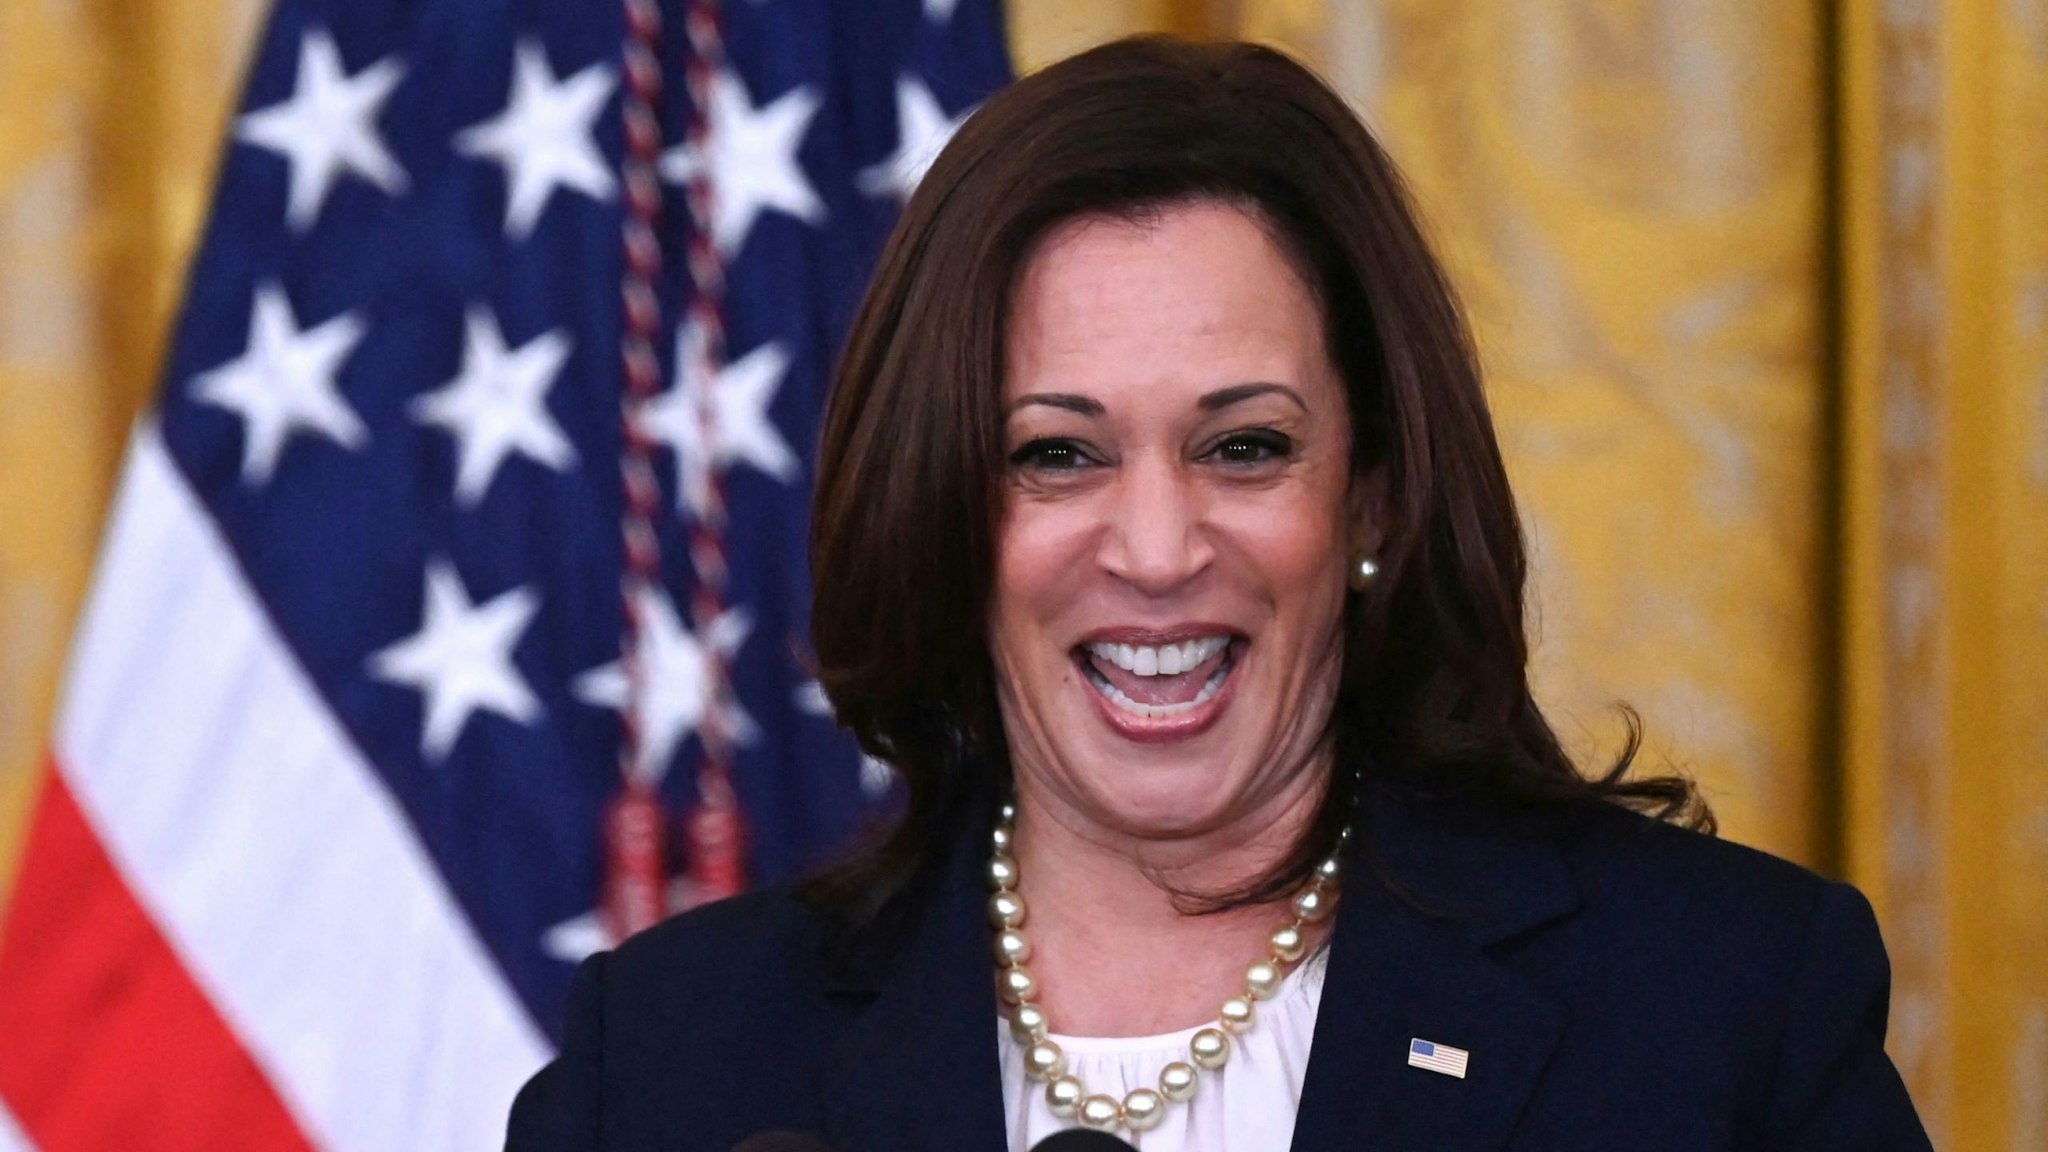 TOPSHOT - Vice President Kamala Harris speaks as President Joe Biden applauds on during an event to mark the passage of the Juneteenth National Independence Day Act, in the East Room of the White House, June 17, 2021, in Washington.